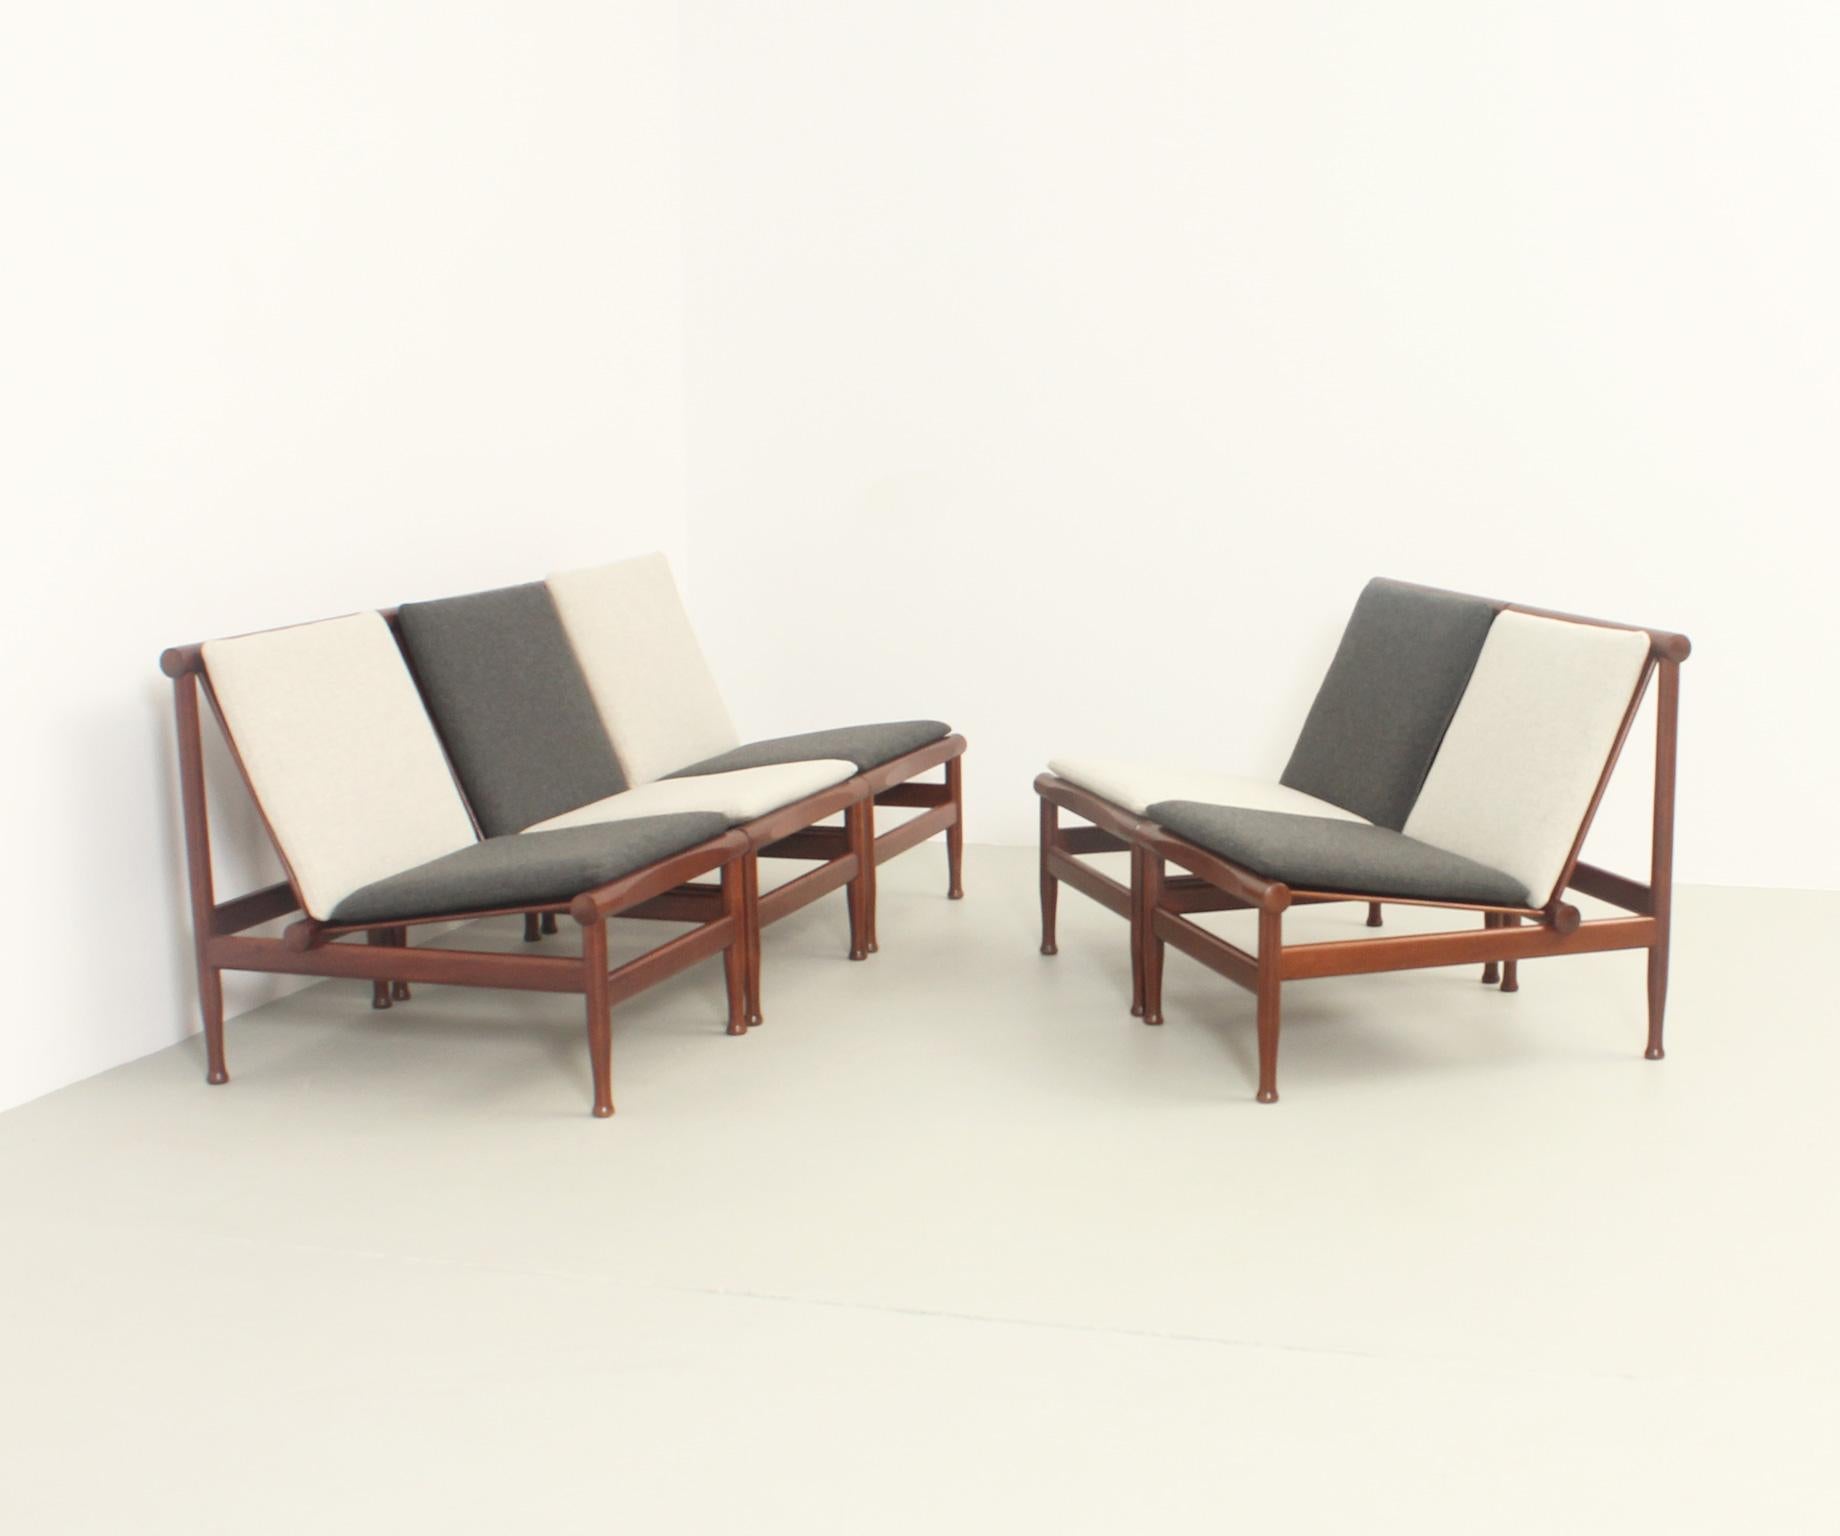 Five Japan easy chairs or model 501 designed in 1950's by Kai Lyngfeldt Larsen for Søborg Møbler, Denmark. Teak wood structure and new loose cushions upholstered with Kvadrat fabric in two tones. See also the coffee and side tables from the same set.